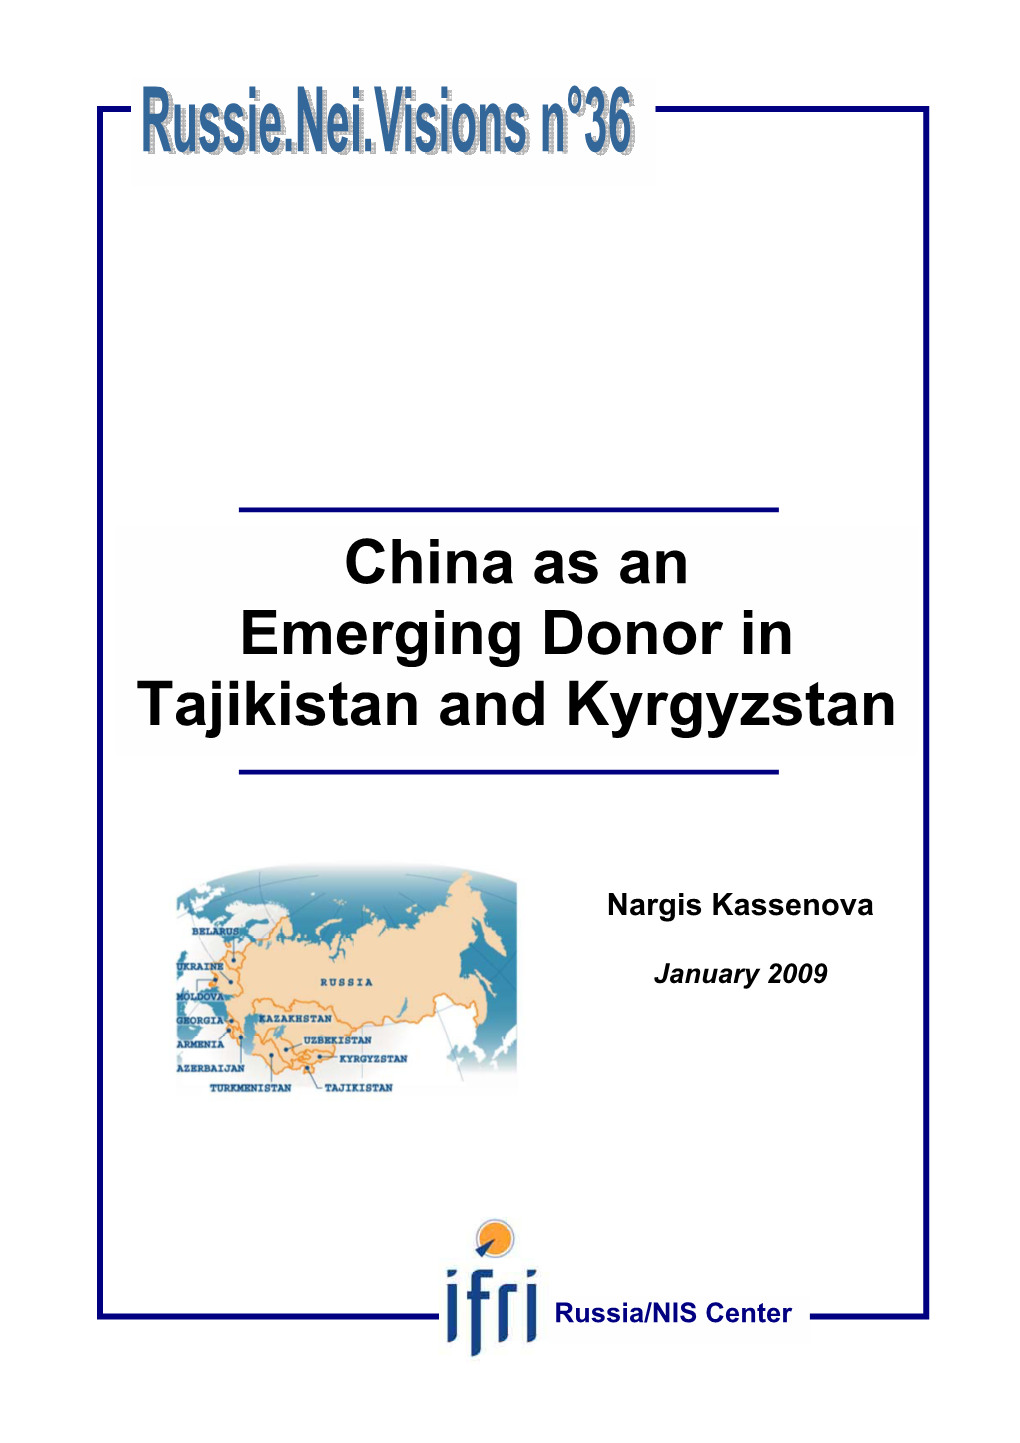 China As an Emerging Donor in Tajikistan and Kyrgyzstan